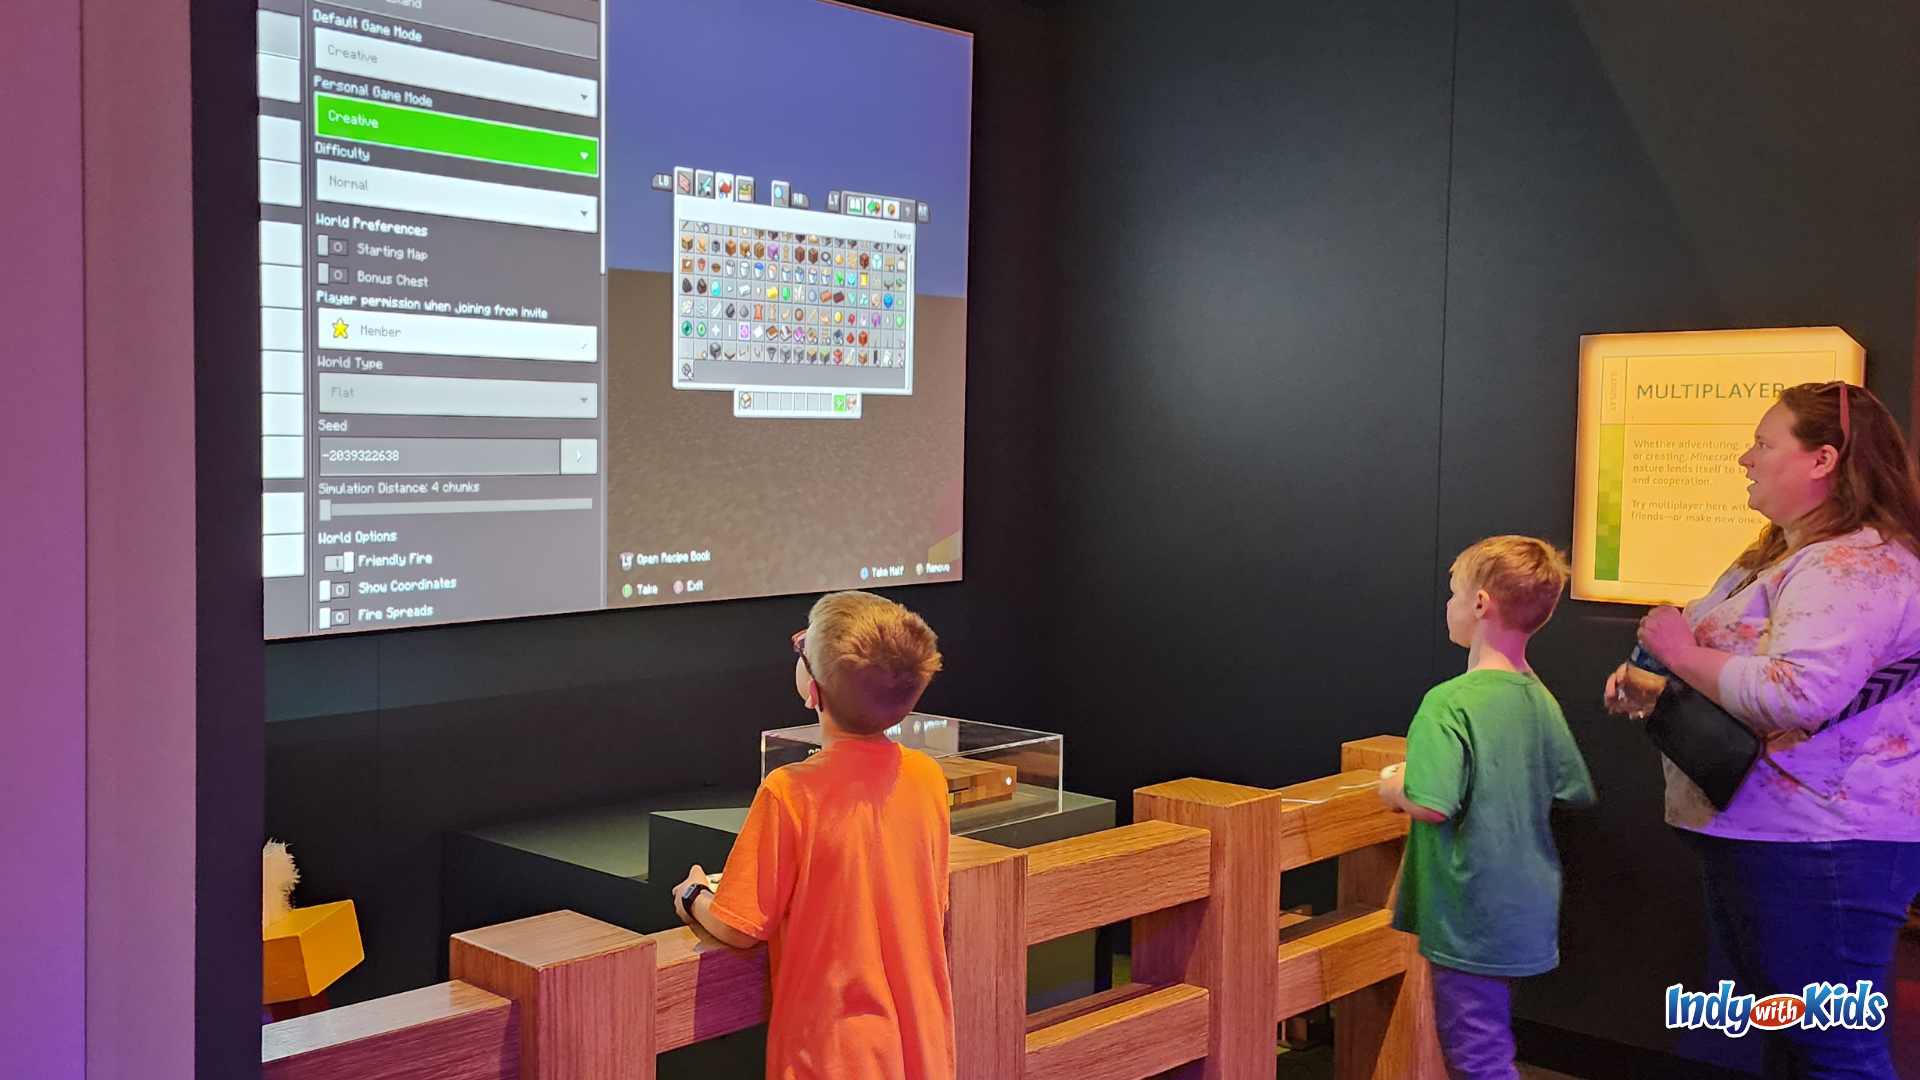 Minecraft: The Exhibition at The Children's Museum of Indianapolis big screen game play